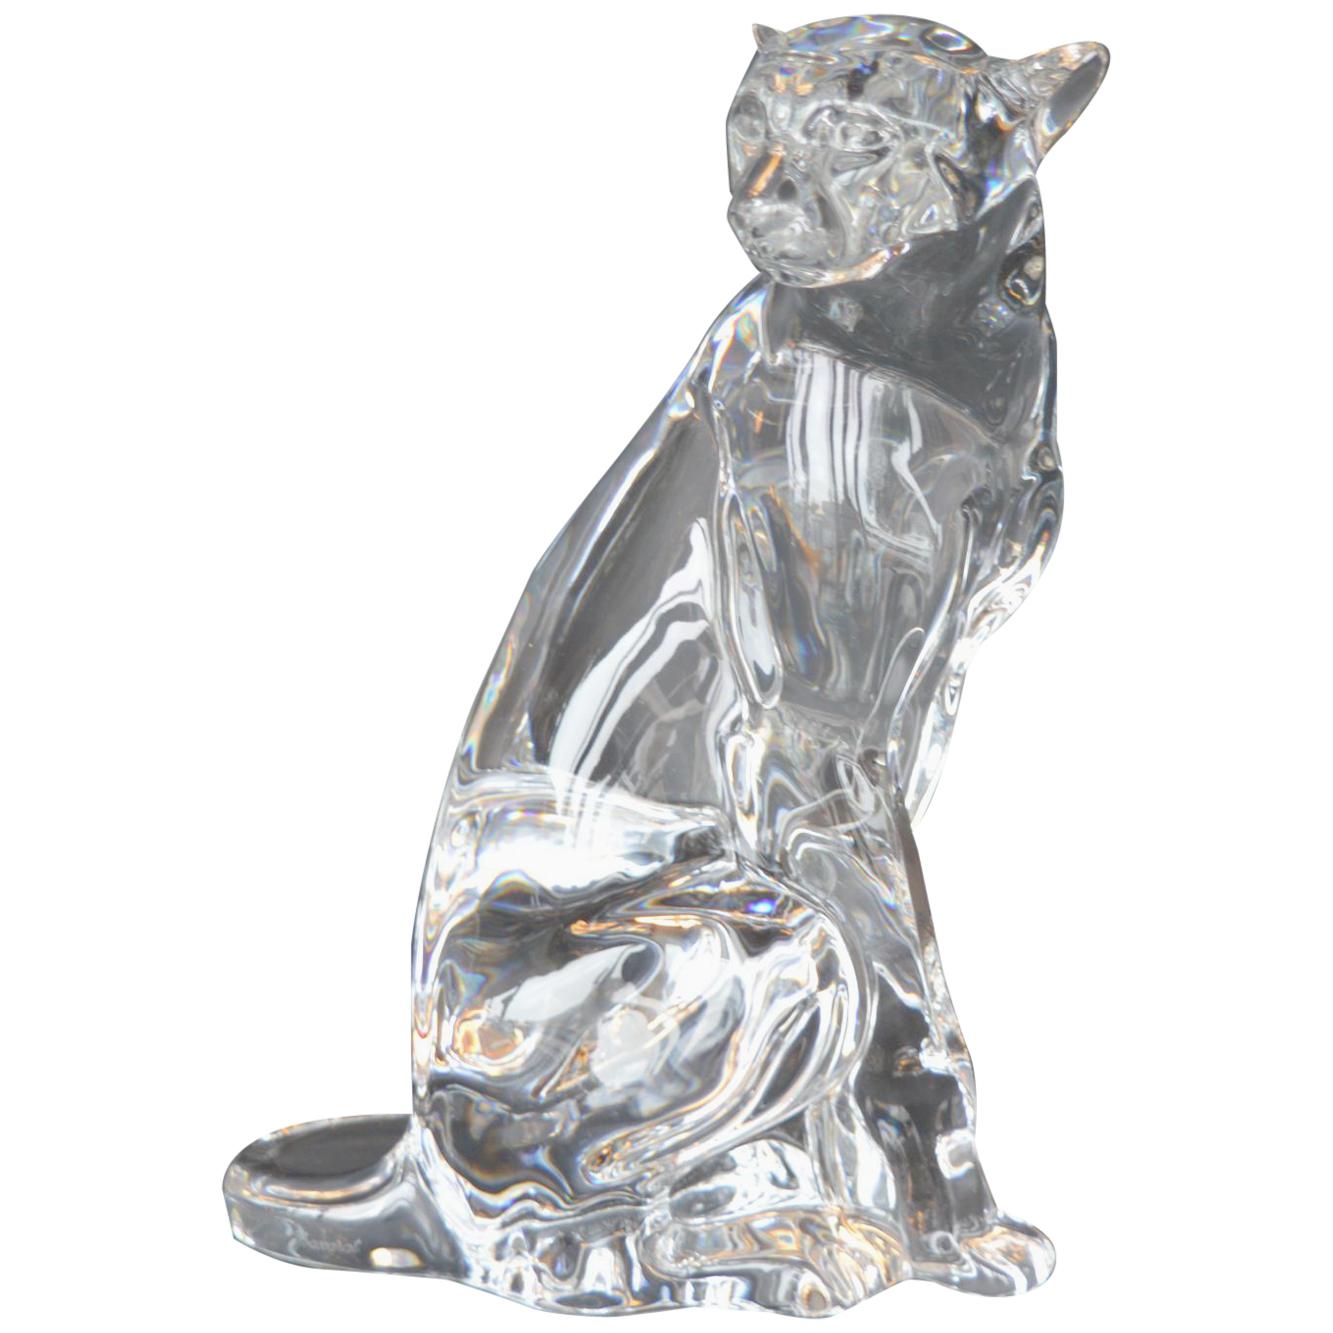 Baccarat Crystal Panther Figure